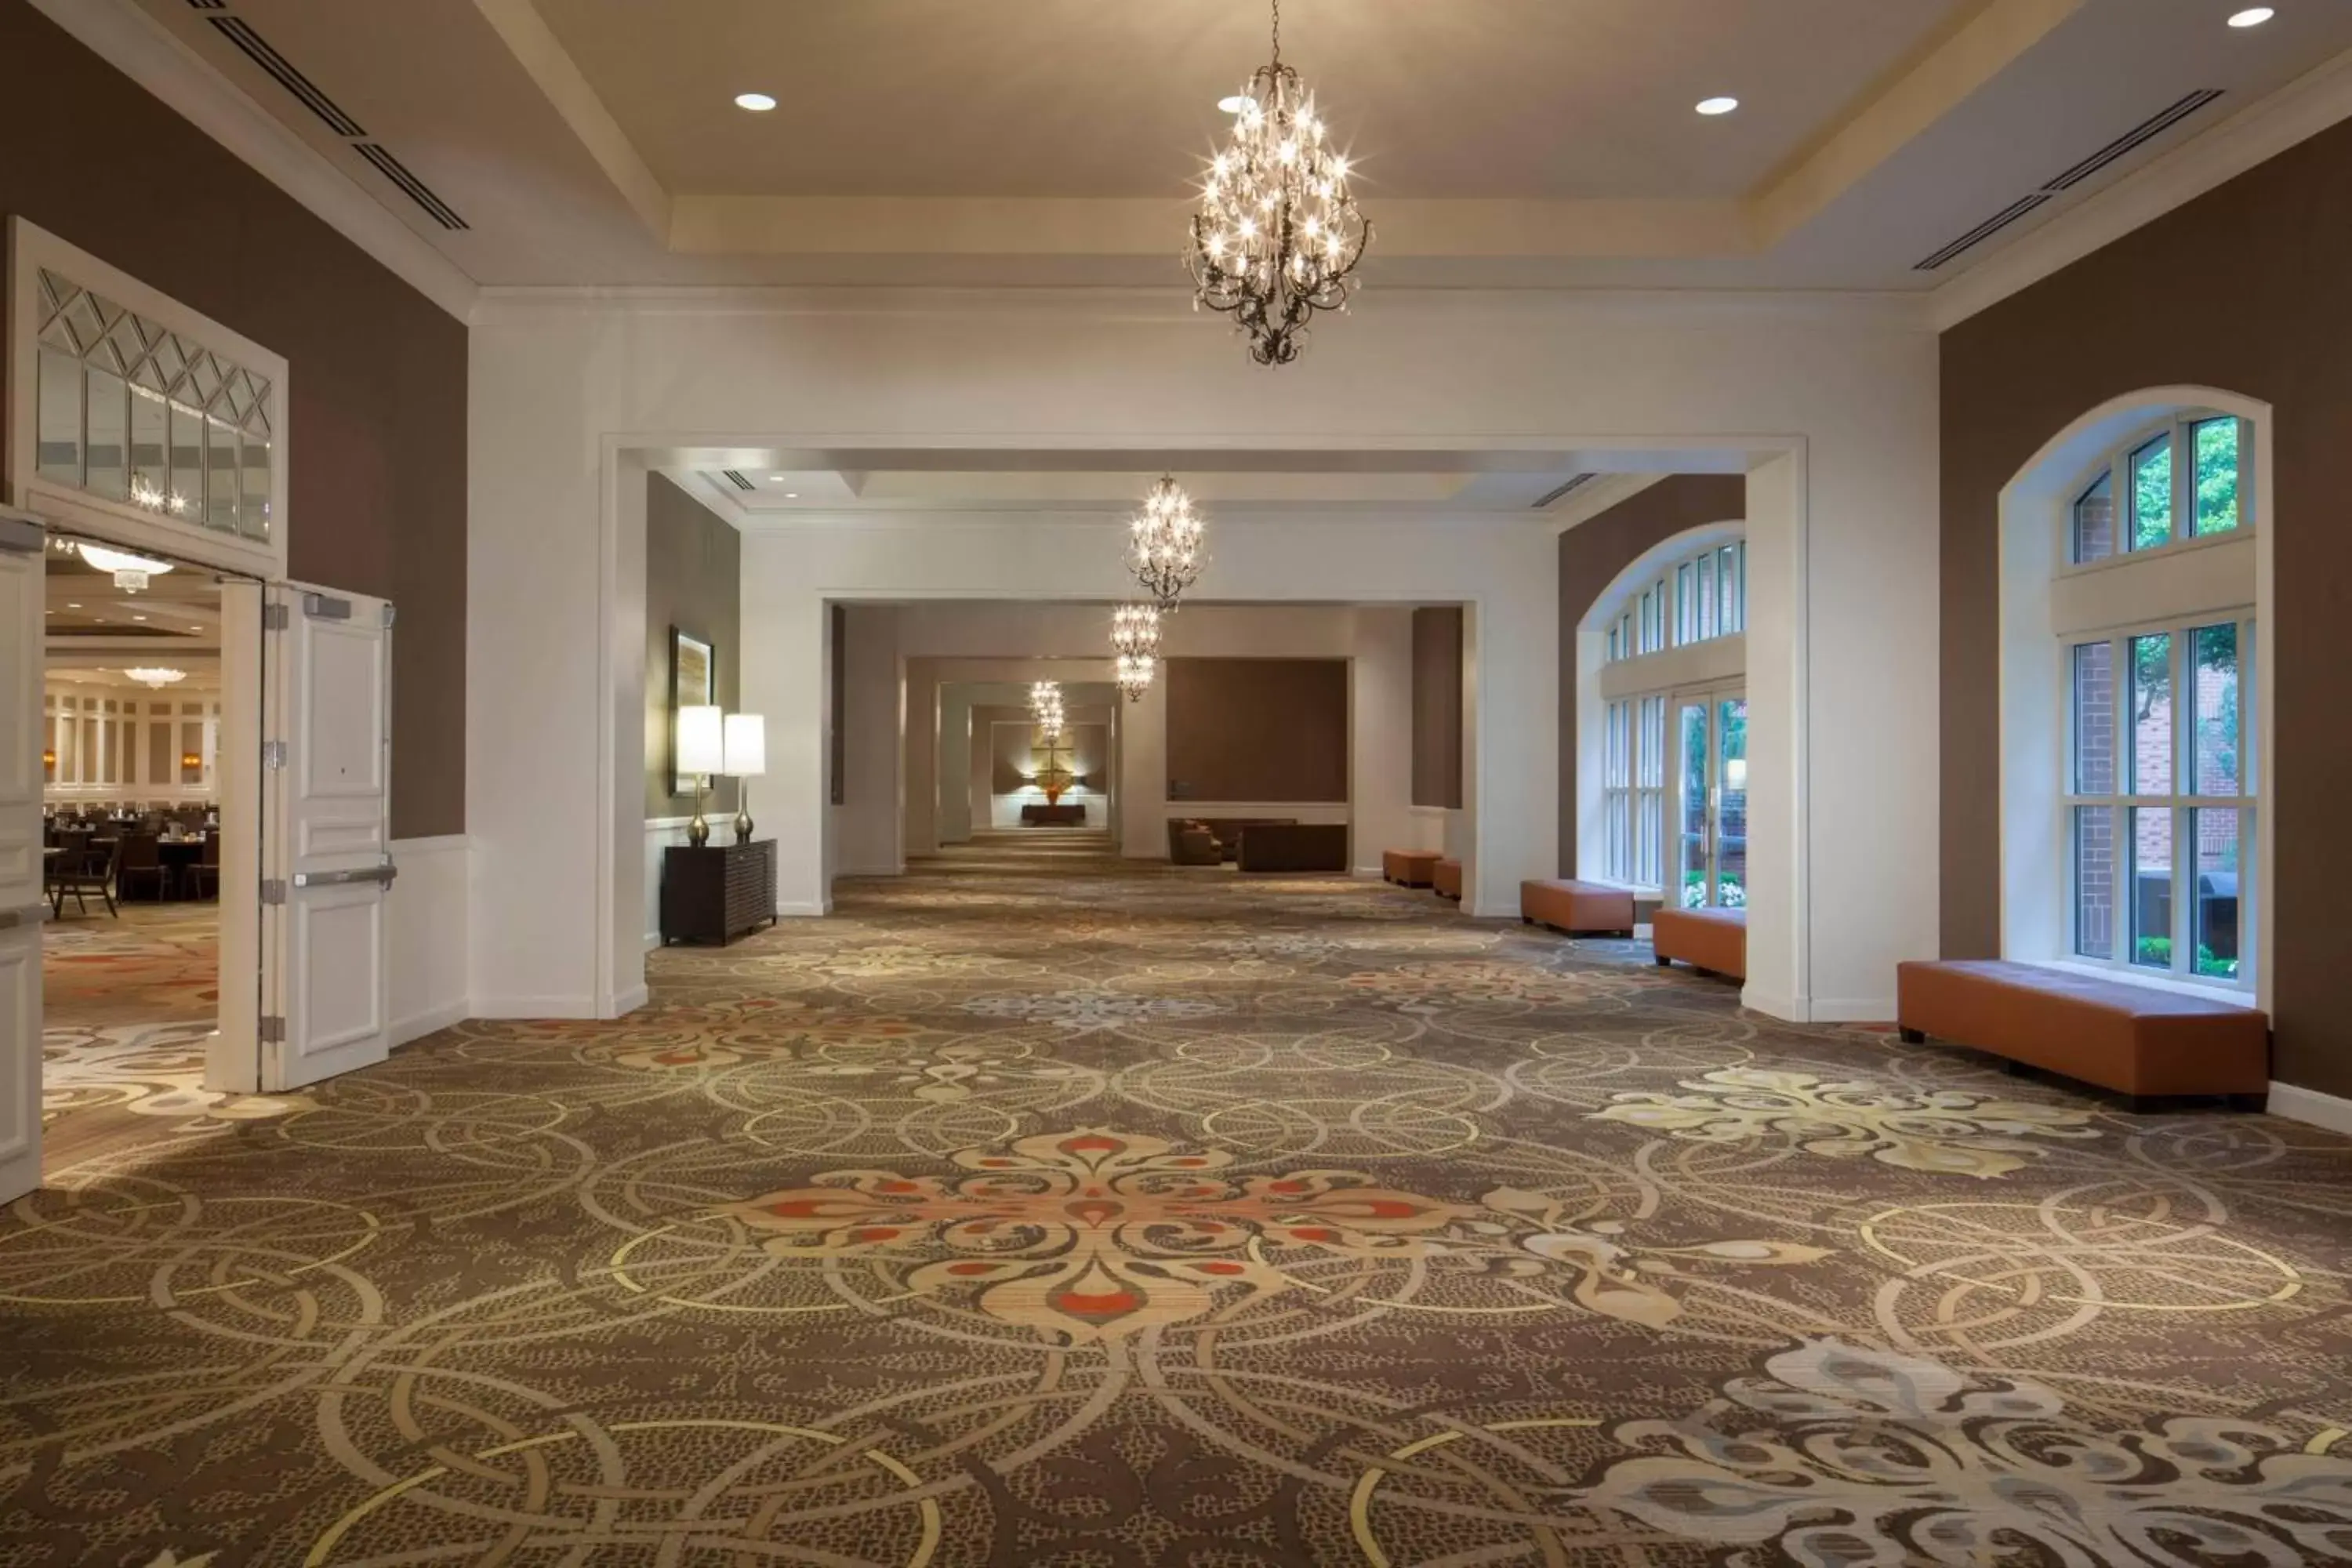 Meeting/conference room, Lobby/Reception in Houston Marriott Sugar Land